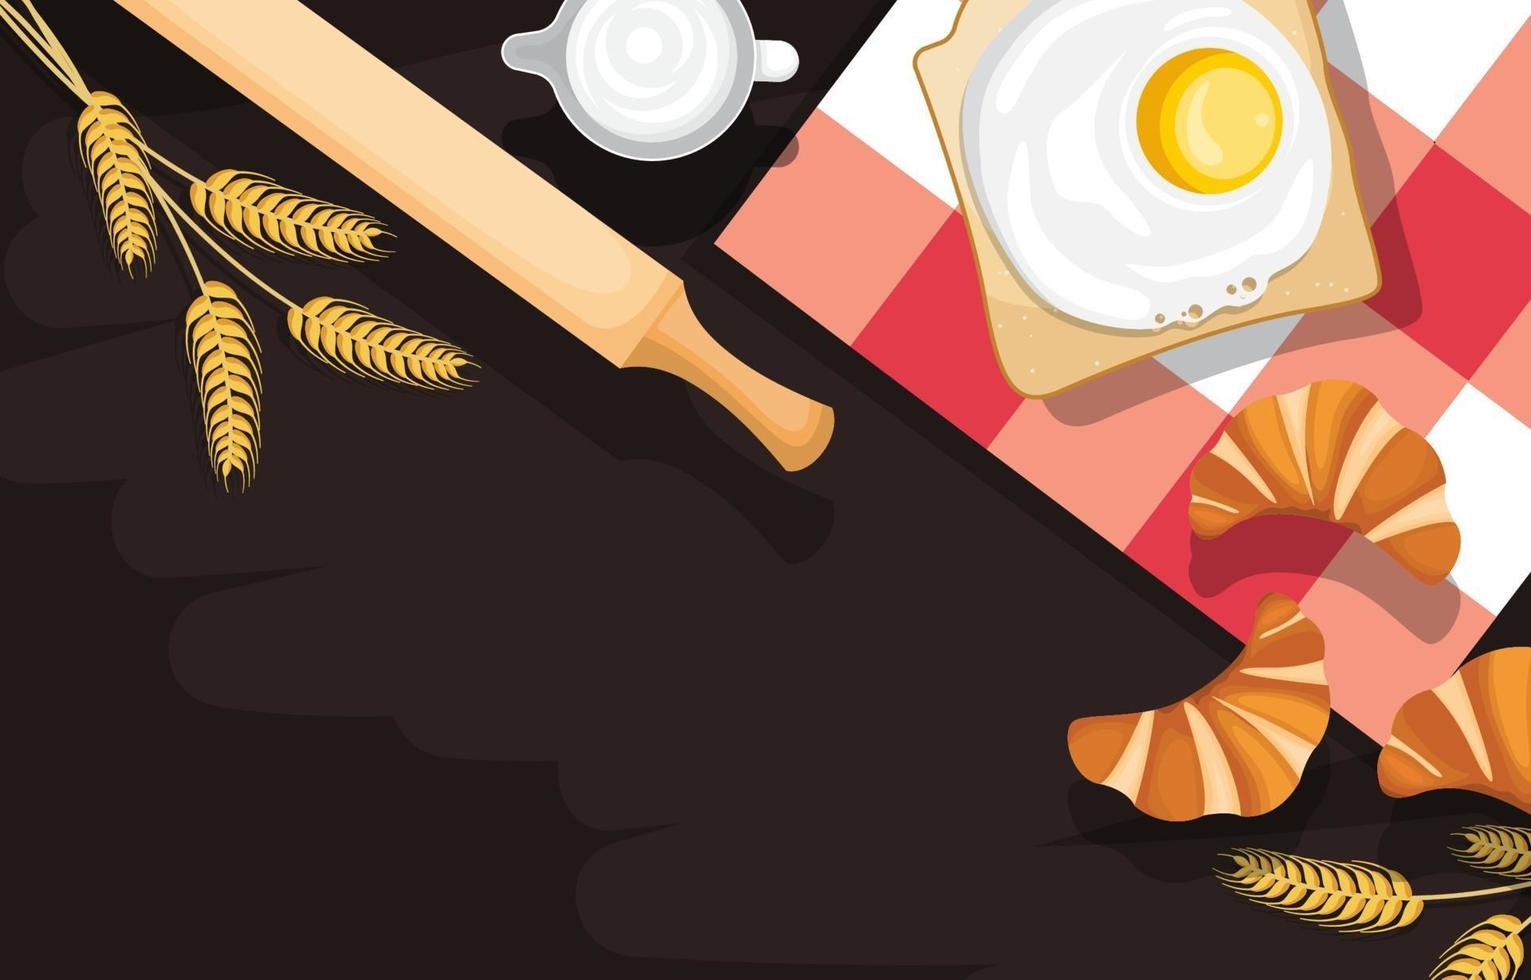 Egg on Bread, Croissant, and Rolling Pin on Kitchen Background vector